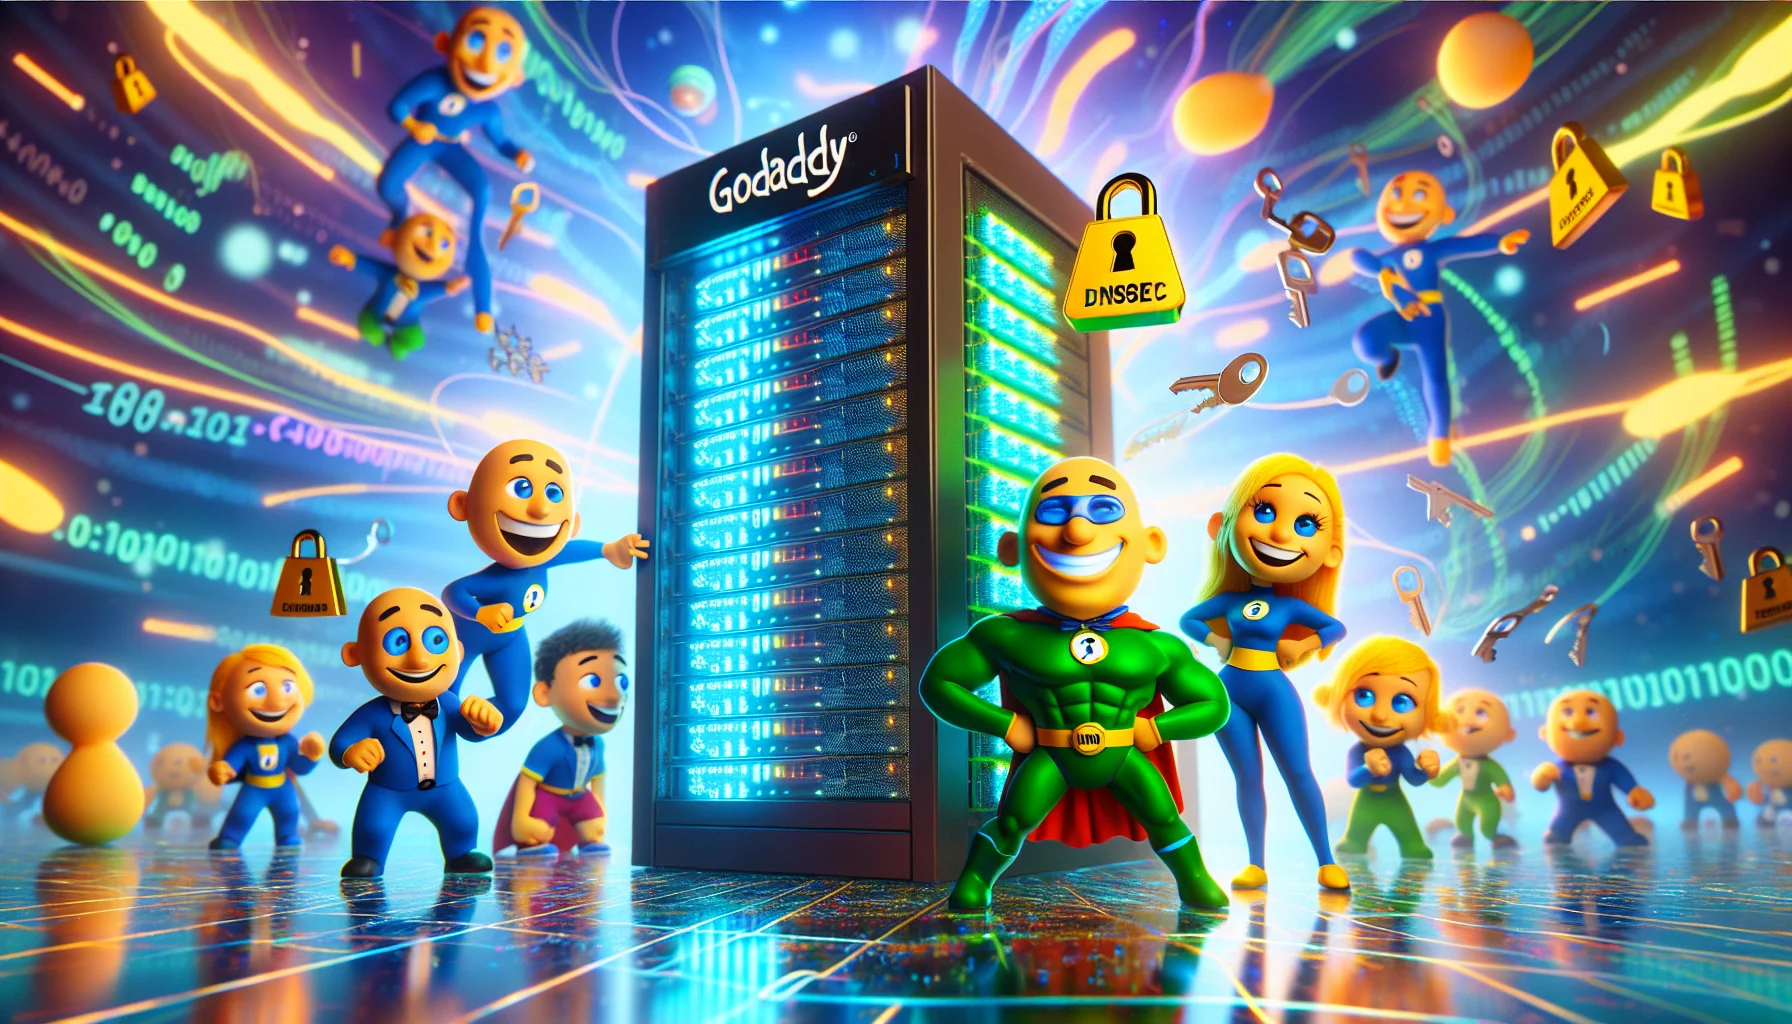 Imagine an amusing scene set in a virtual world. A tall server rack glimmers with blue and green lights, symbolizing GoDaddy web hosting. Around it, fun-loving characters embodying security protocols, with the lead character representing DNSSEC, use superhero-like abilities to protect the server. DNSSEC, with digital keys glowing, locks down data with a grin. The backdrop is a vivacious display of streaming data, transforming codes, and swirling pixels. This whimsical representation should underscore the importance of secure web hosting, making it enticing.